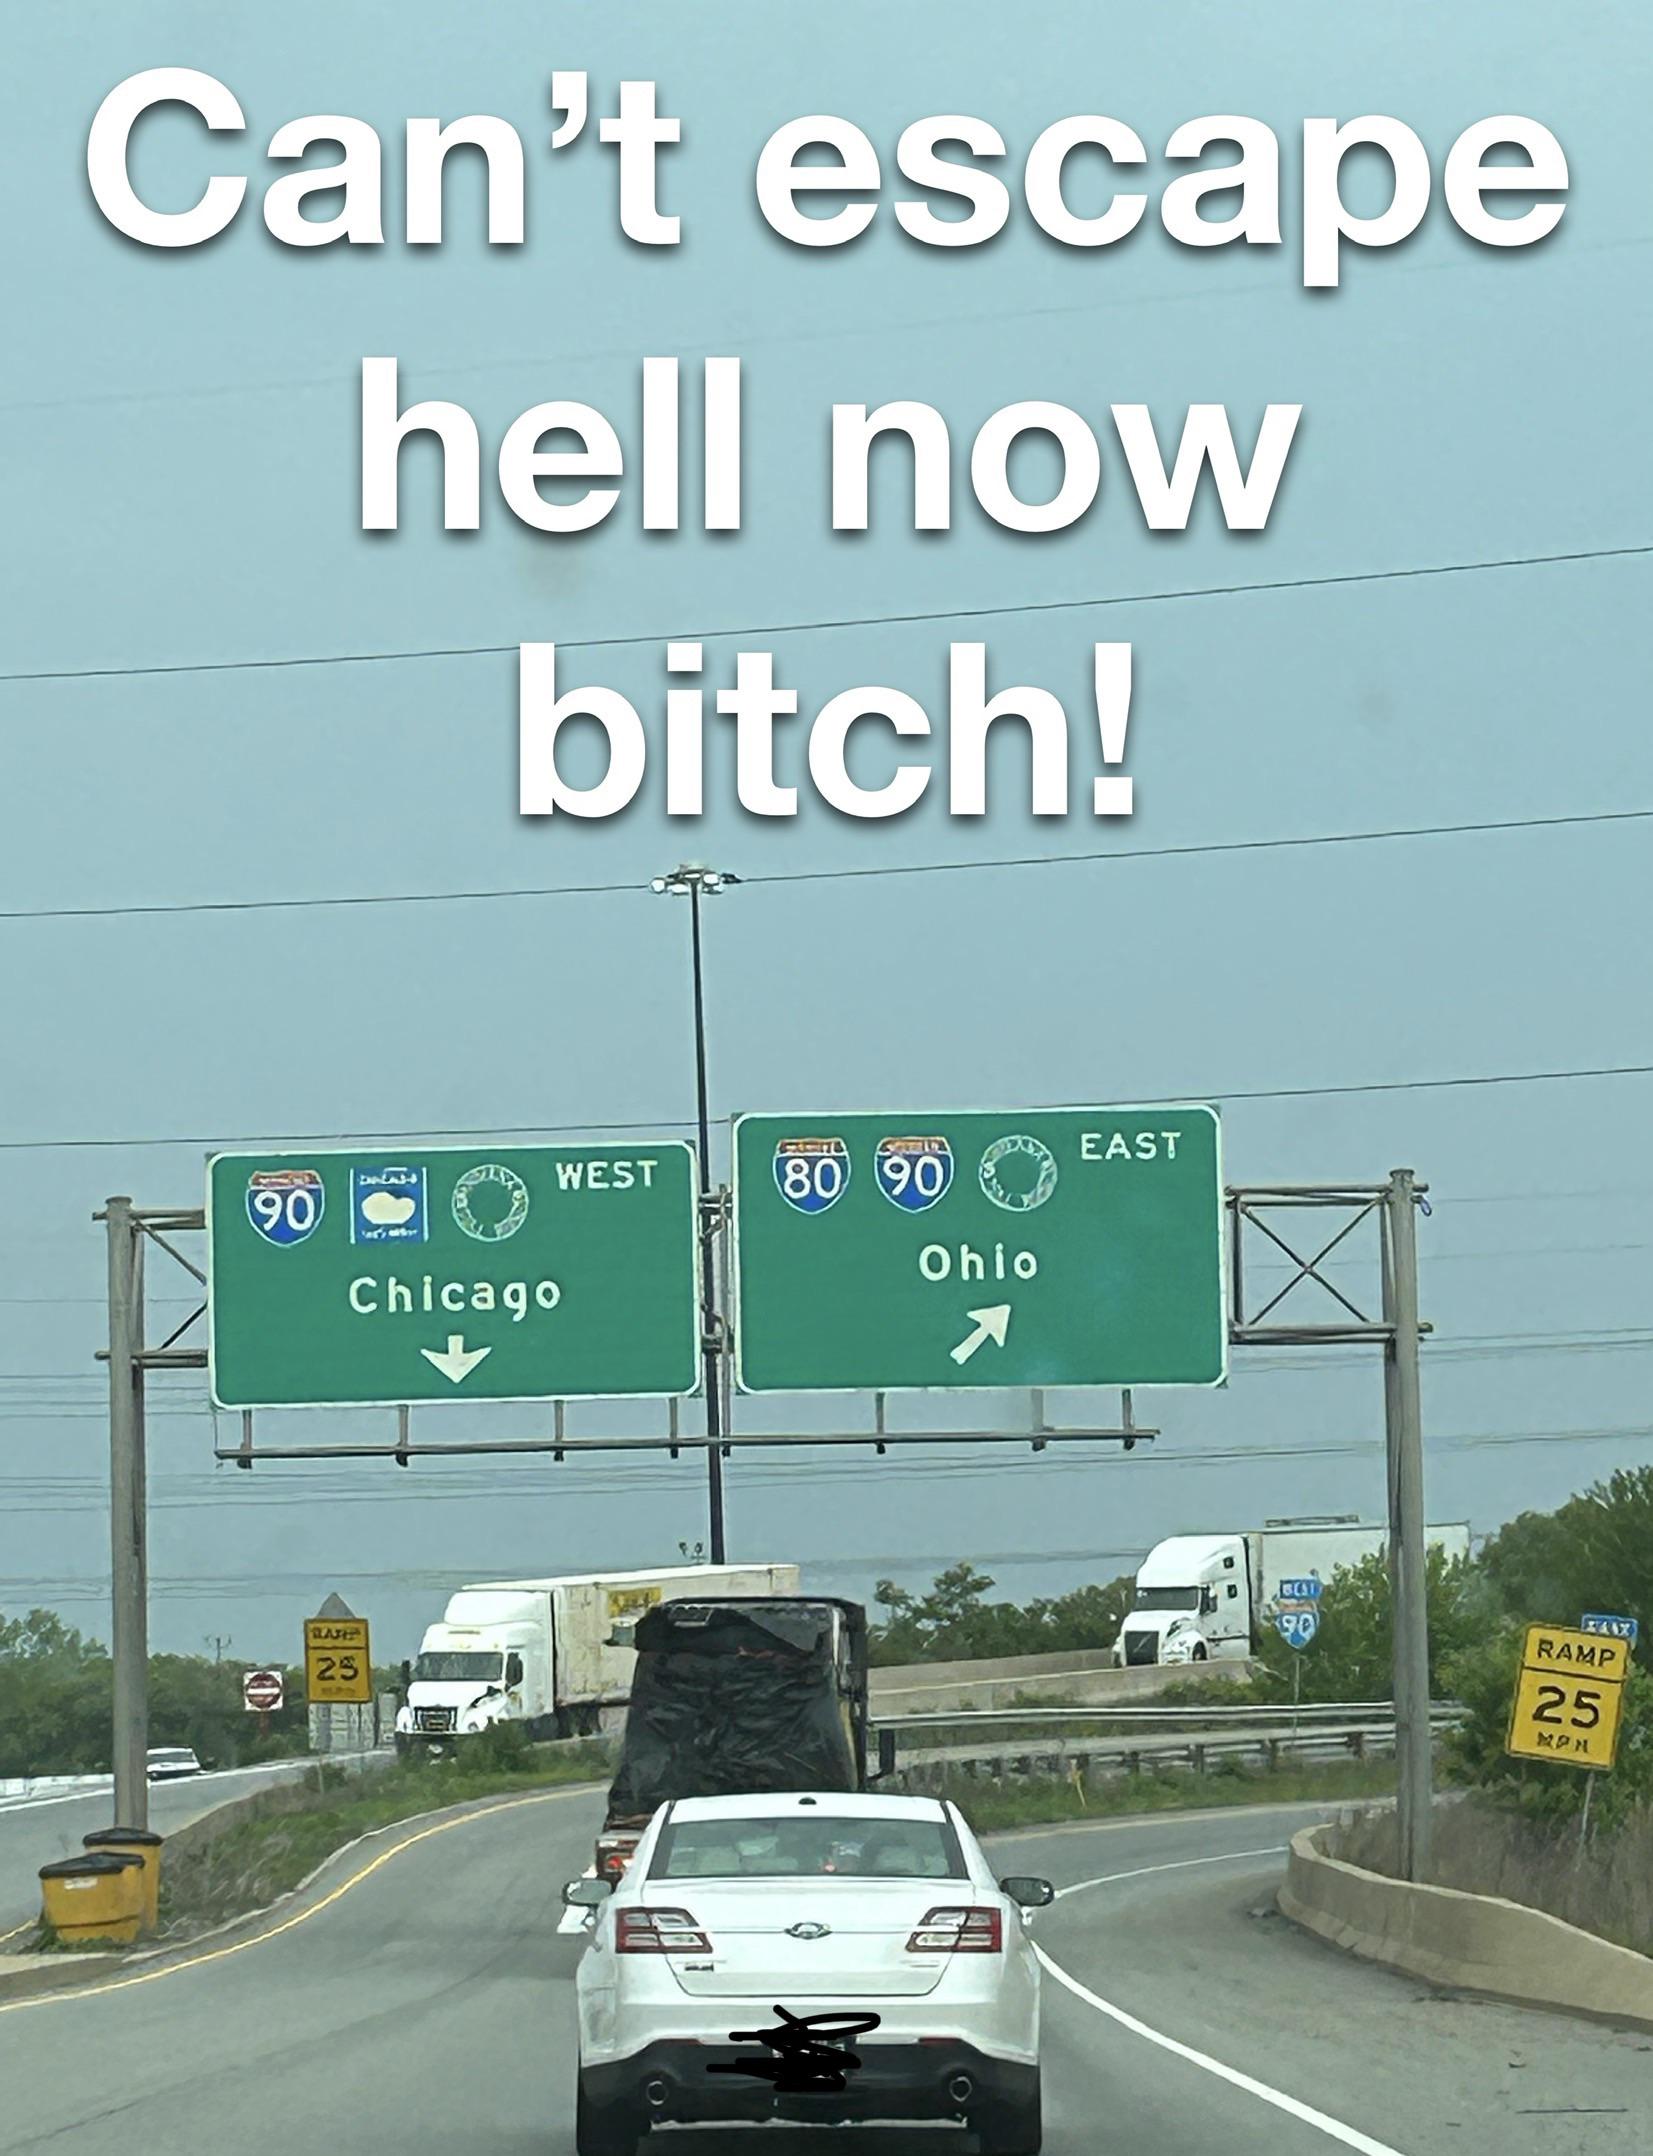 funny pics and memes - lane - Can't escape hell now bitch! 90 4A434 West Chicago 25 F1 80 90 Ohio East Best Ramp 25 Mpn